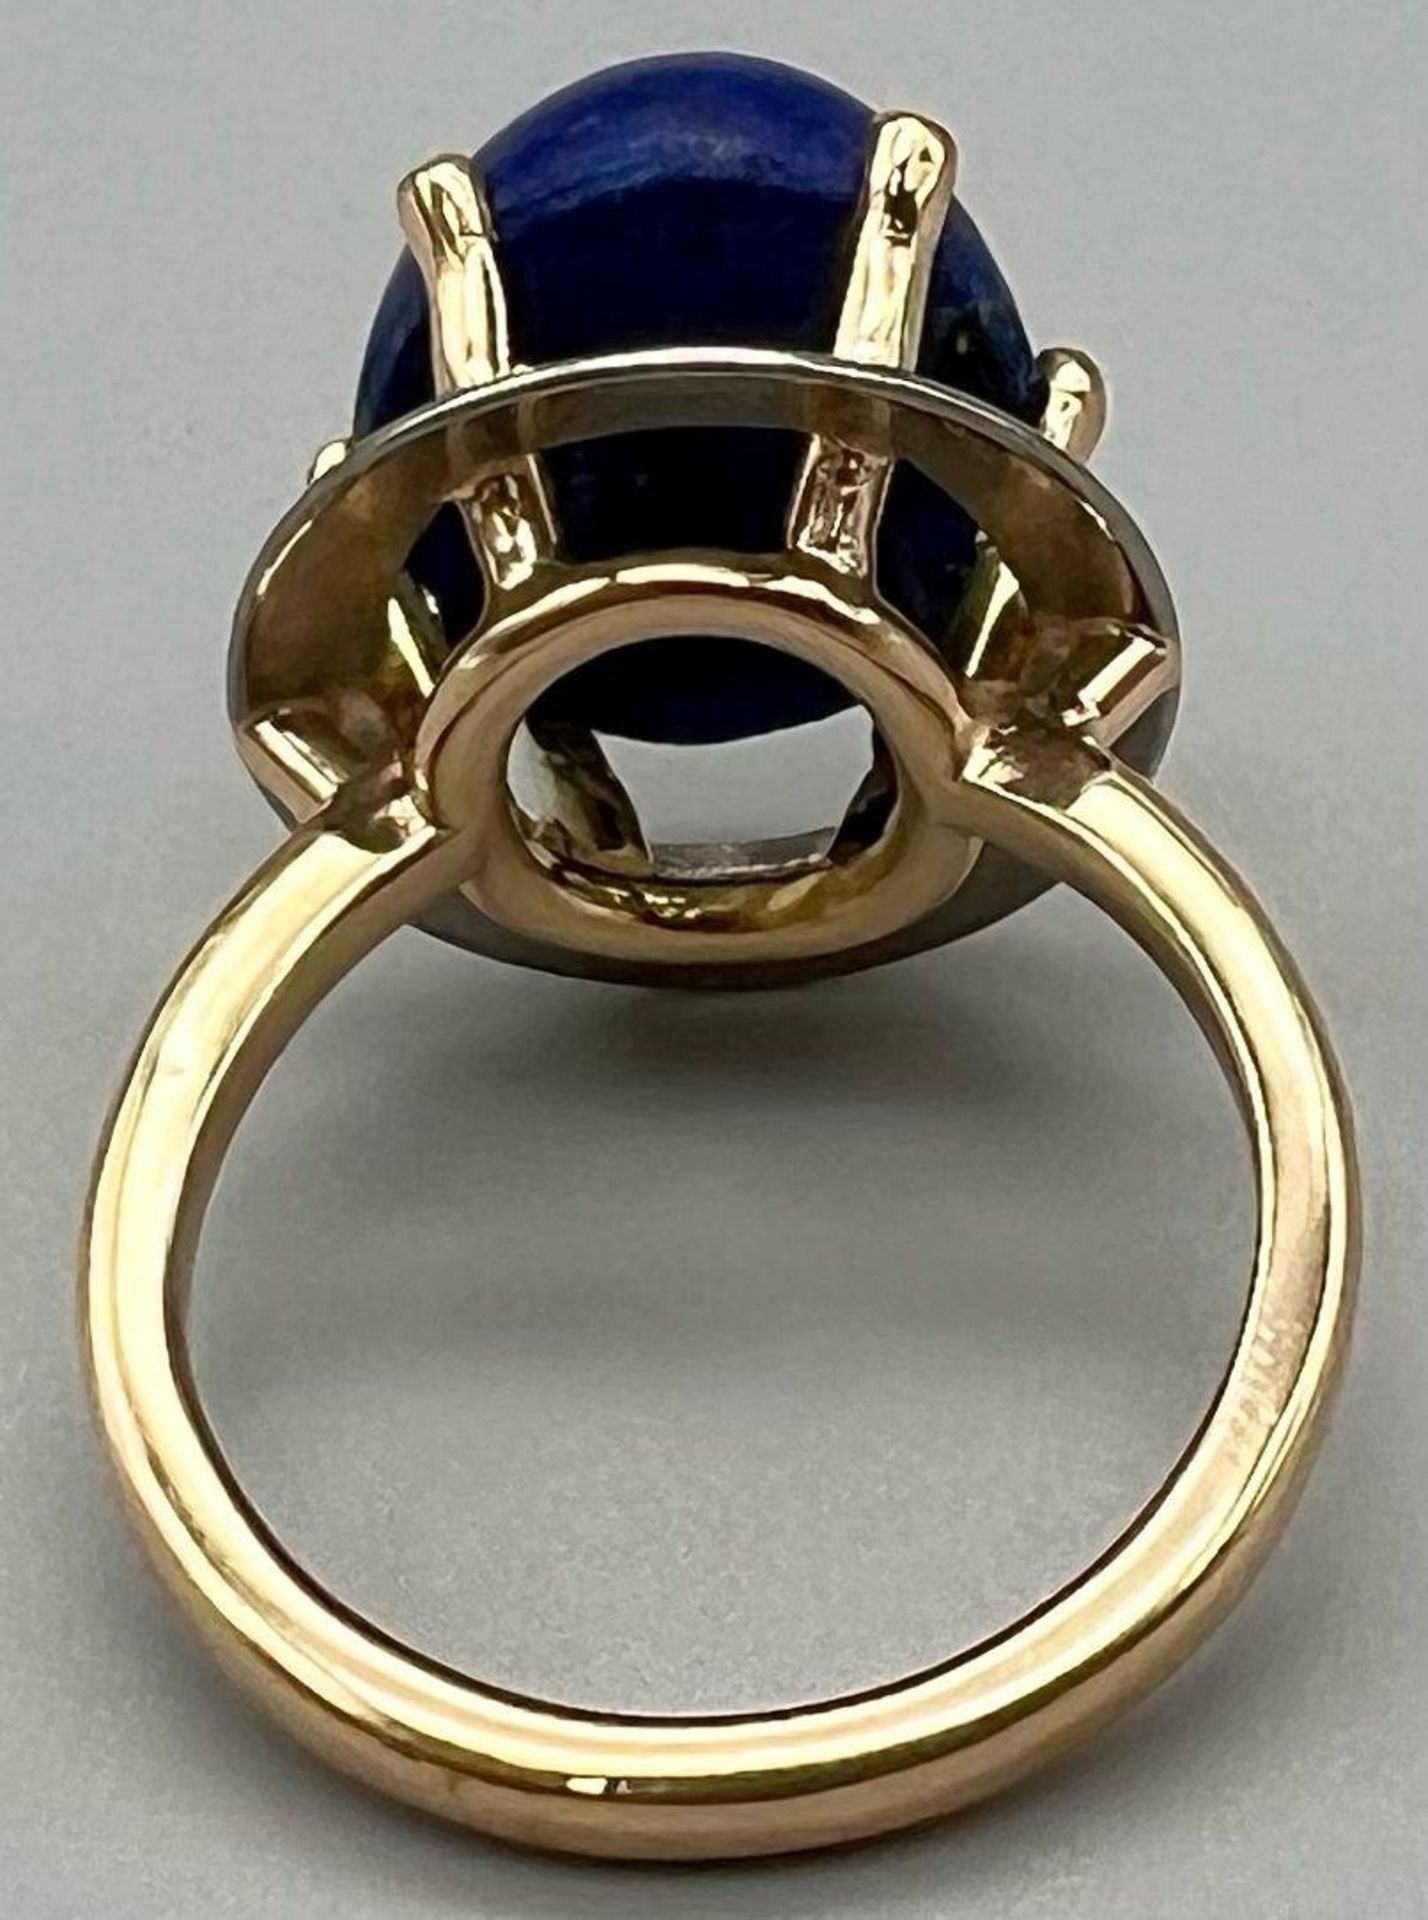 A beautiful 18K yellow and white gold ring with a large lapis lazuli cabochon. Ring size: Q1/2, - Bild 3 aus 4